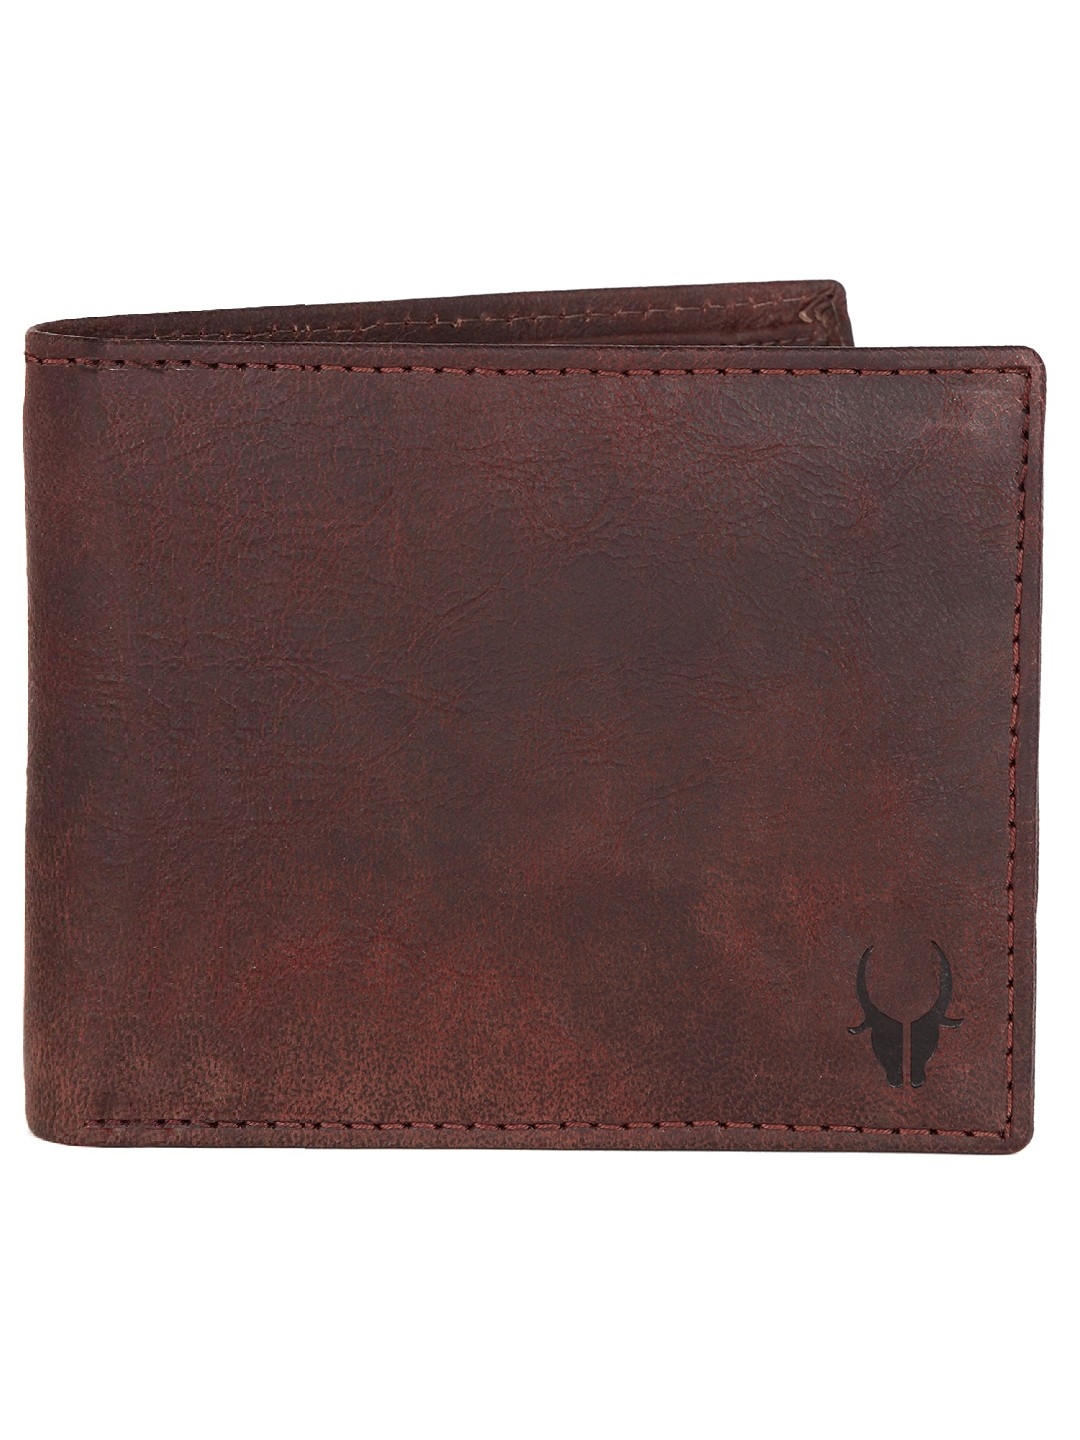 WildHorn | WildHorn RFID Protected High Quality Genuine Leather Brown Wallet for Men